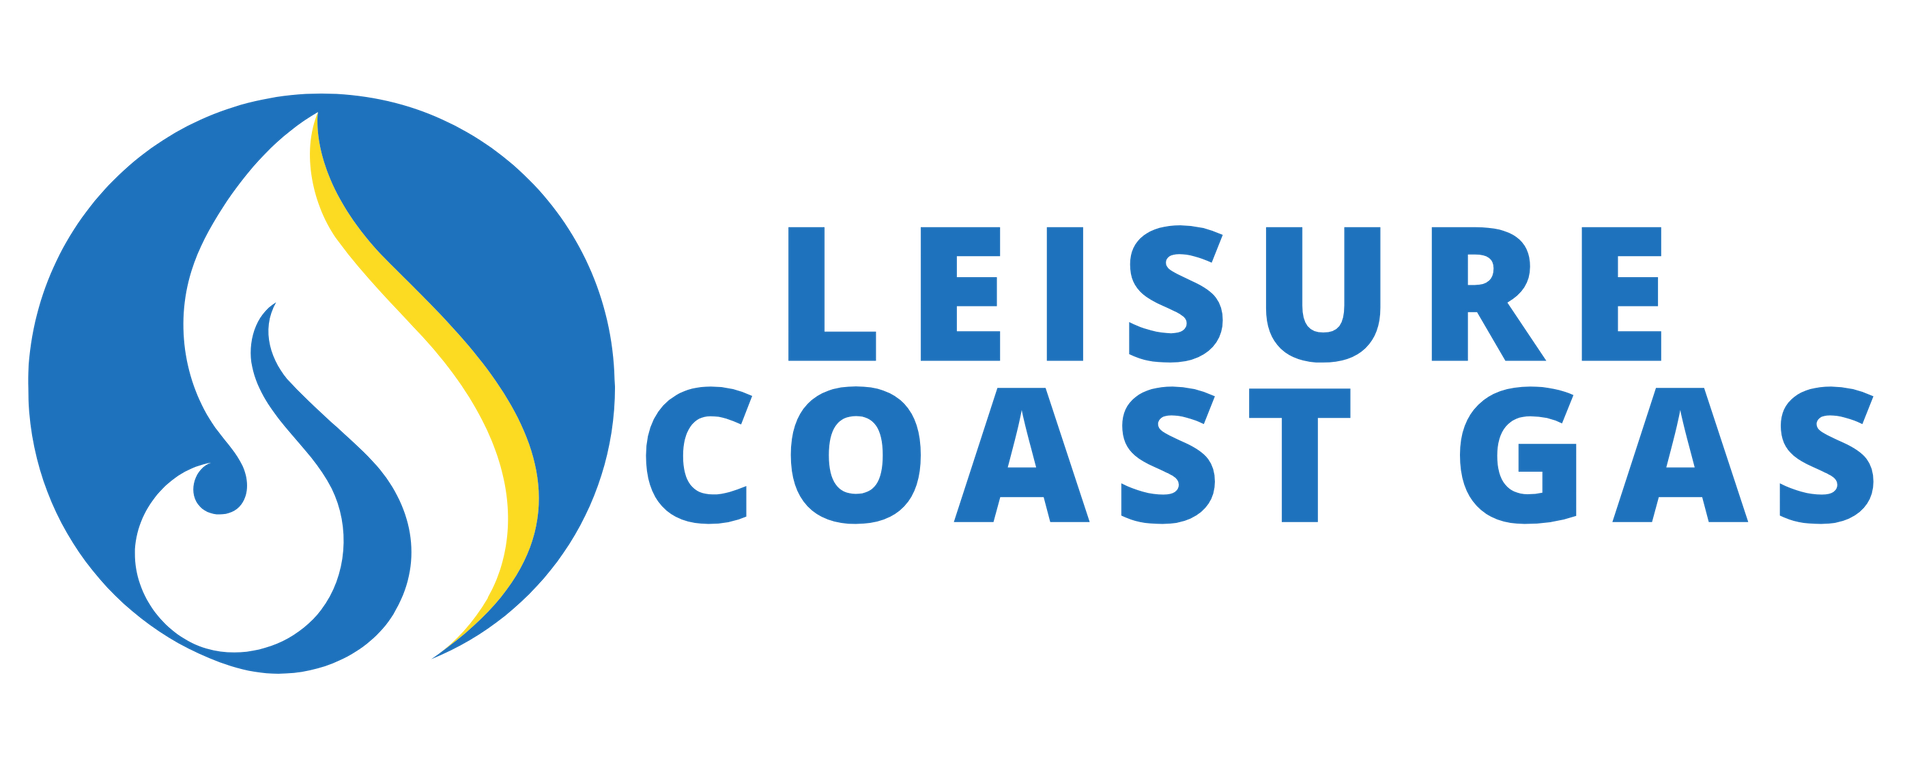 Leisure Coast Gas: Licensed Gas Fitters in Wollongong